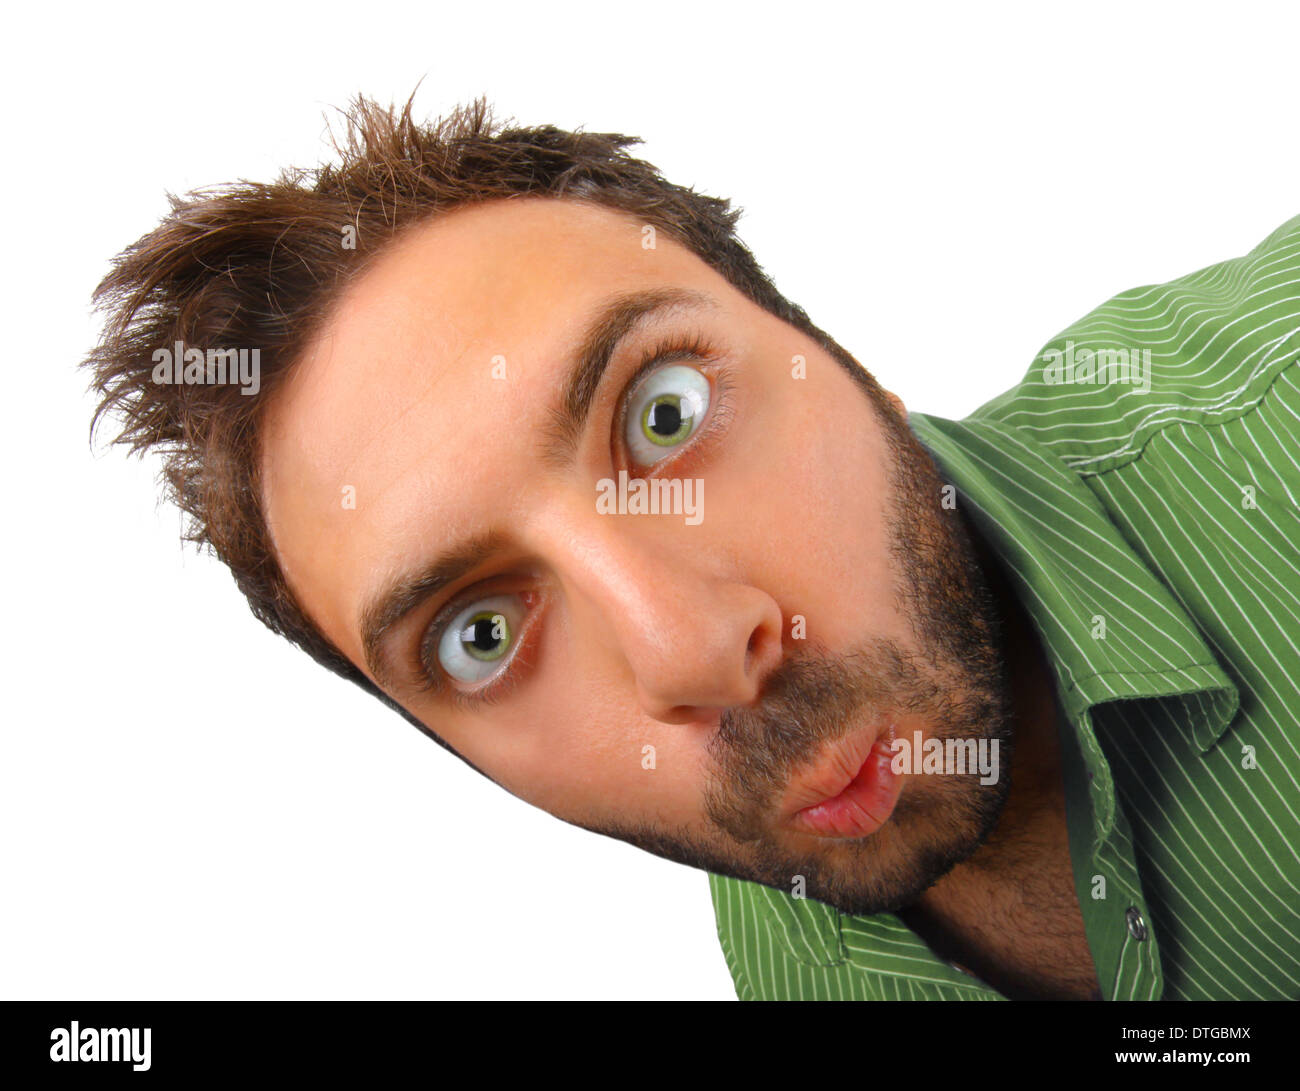 Boy with green shirt with surprised expression WOW. Stock Photo